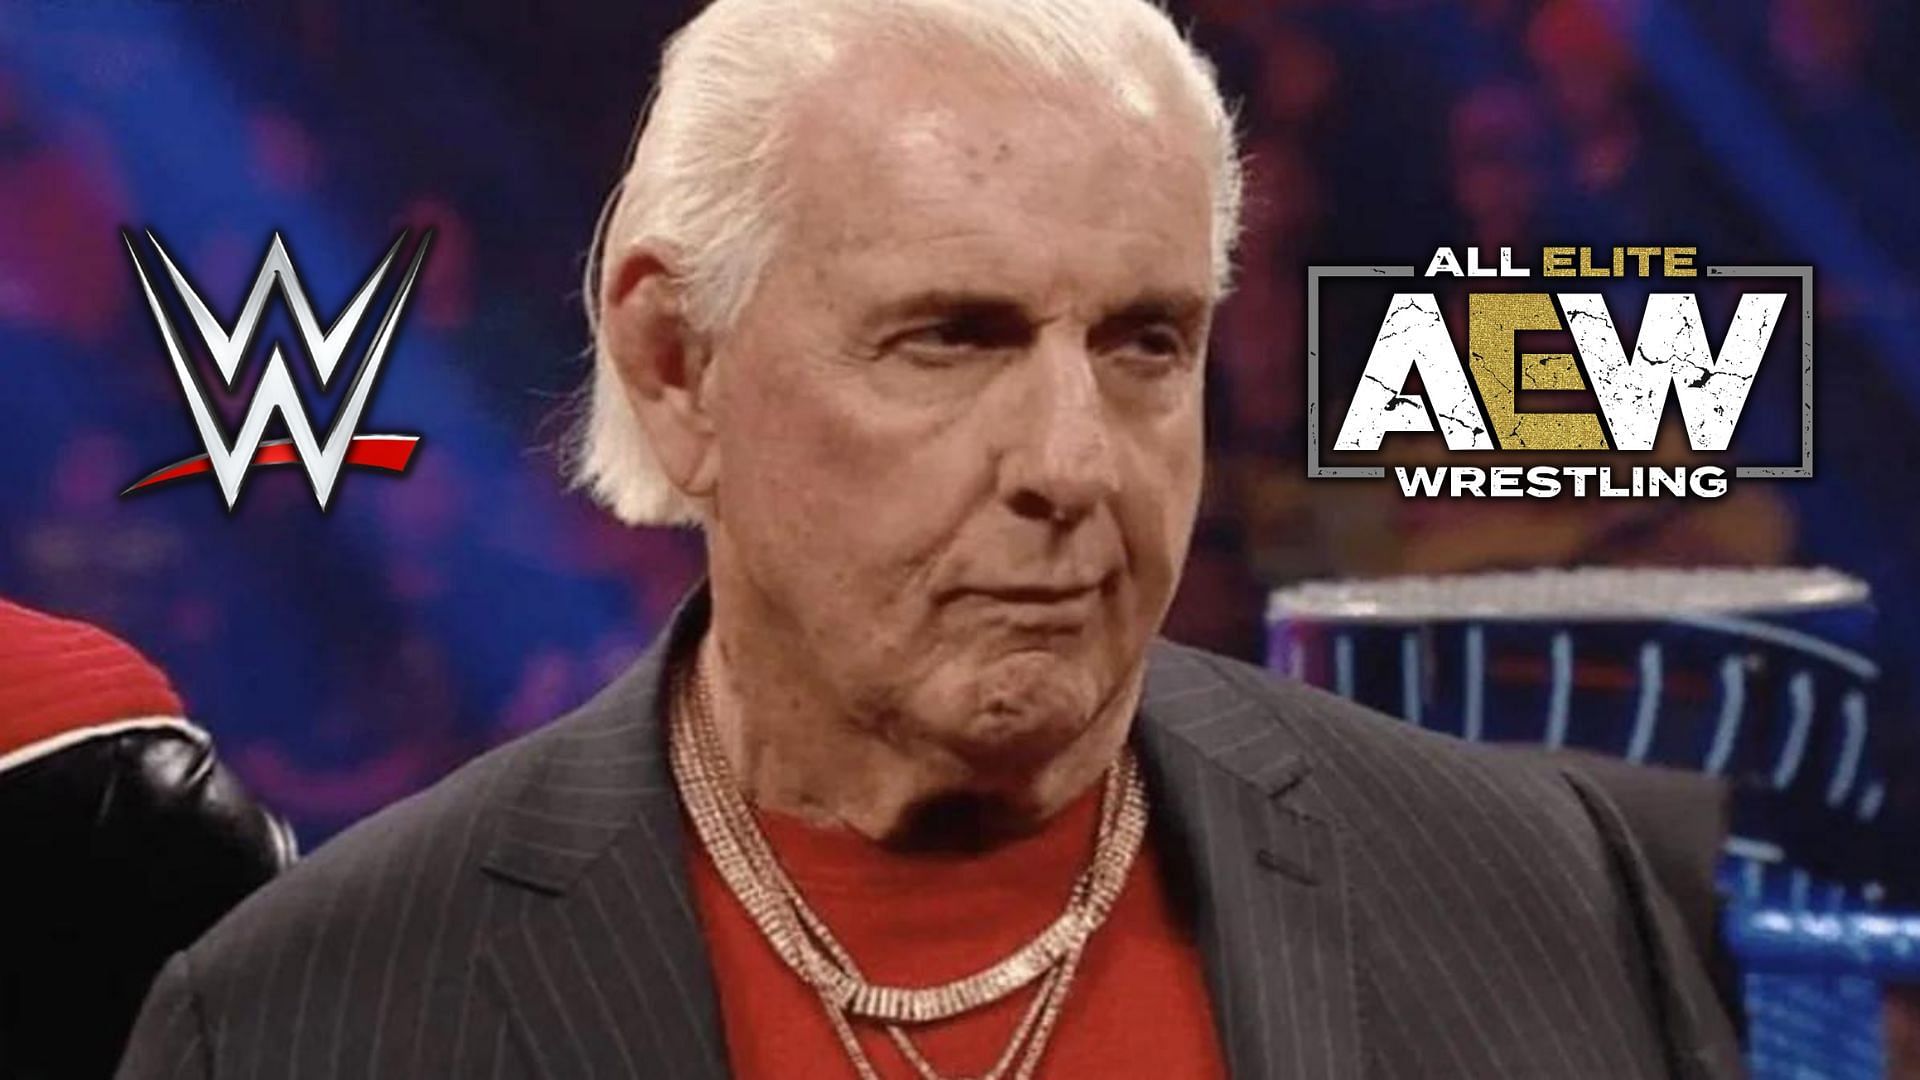 Ric Flair had some interesting comments this week.